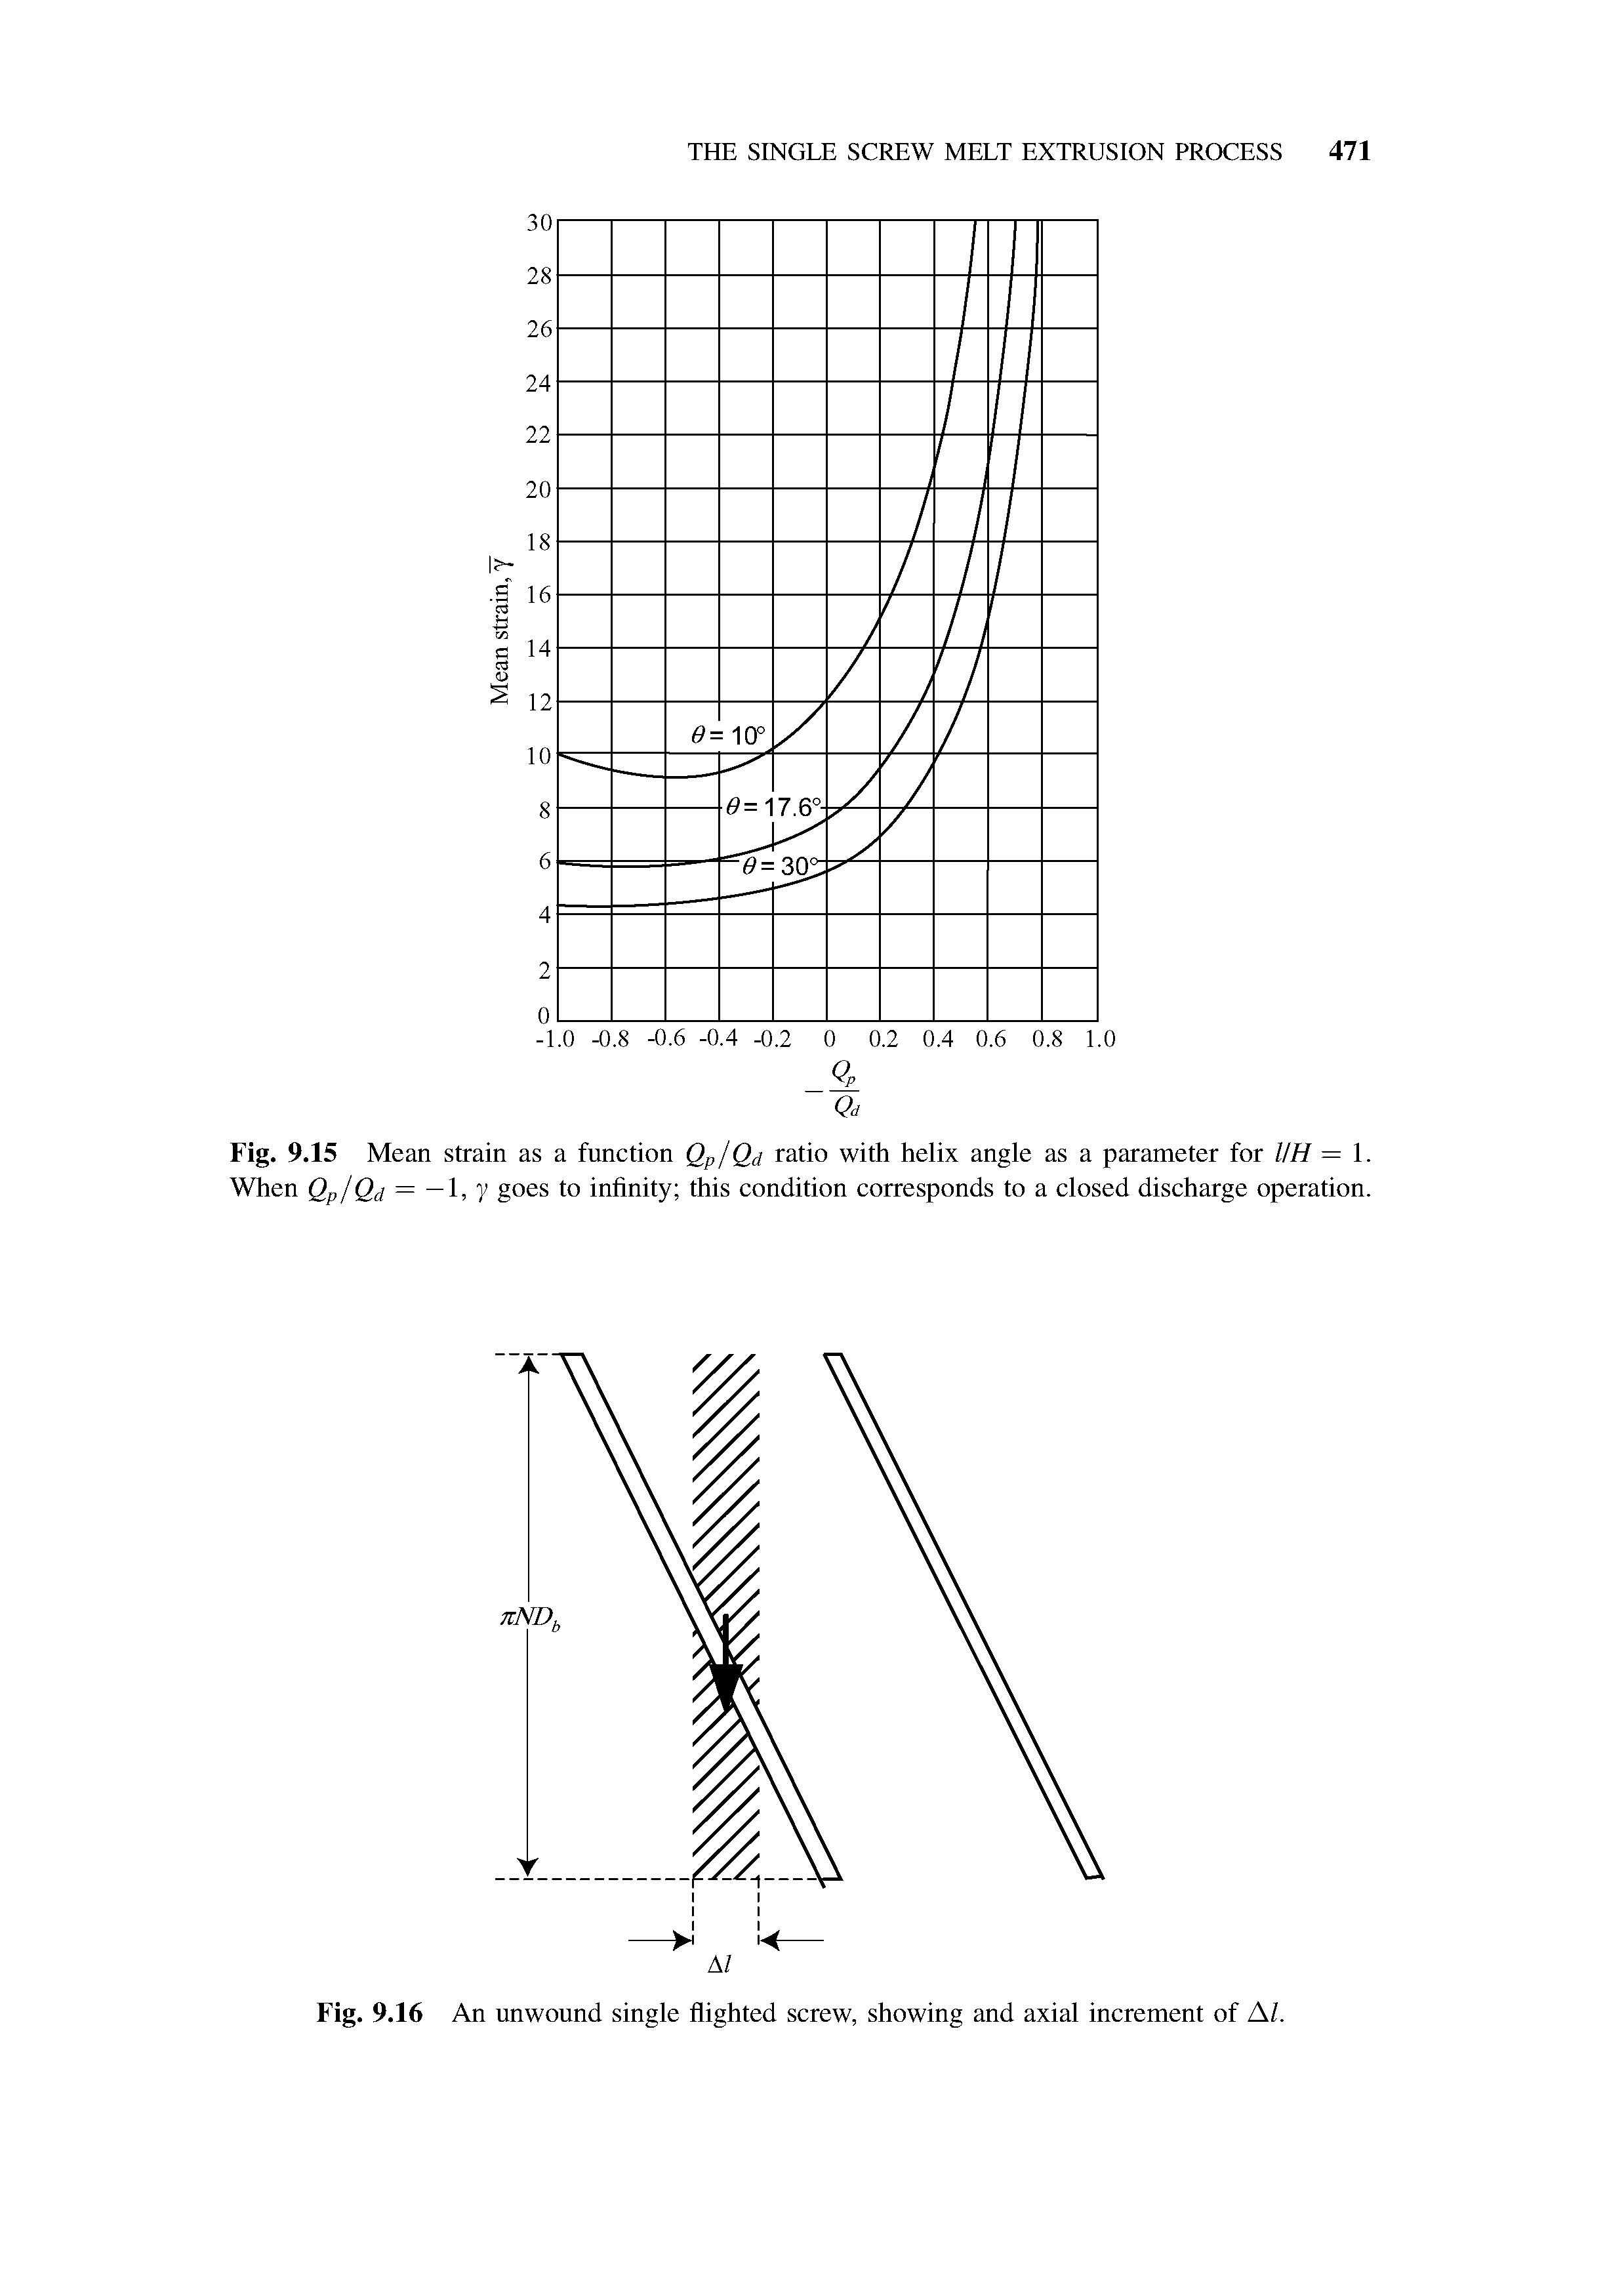 Fig. 9.16 An unwound single flighted screw, showing and axial increment of Al.